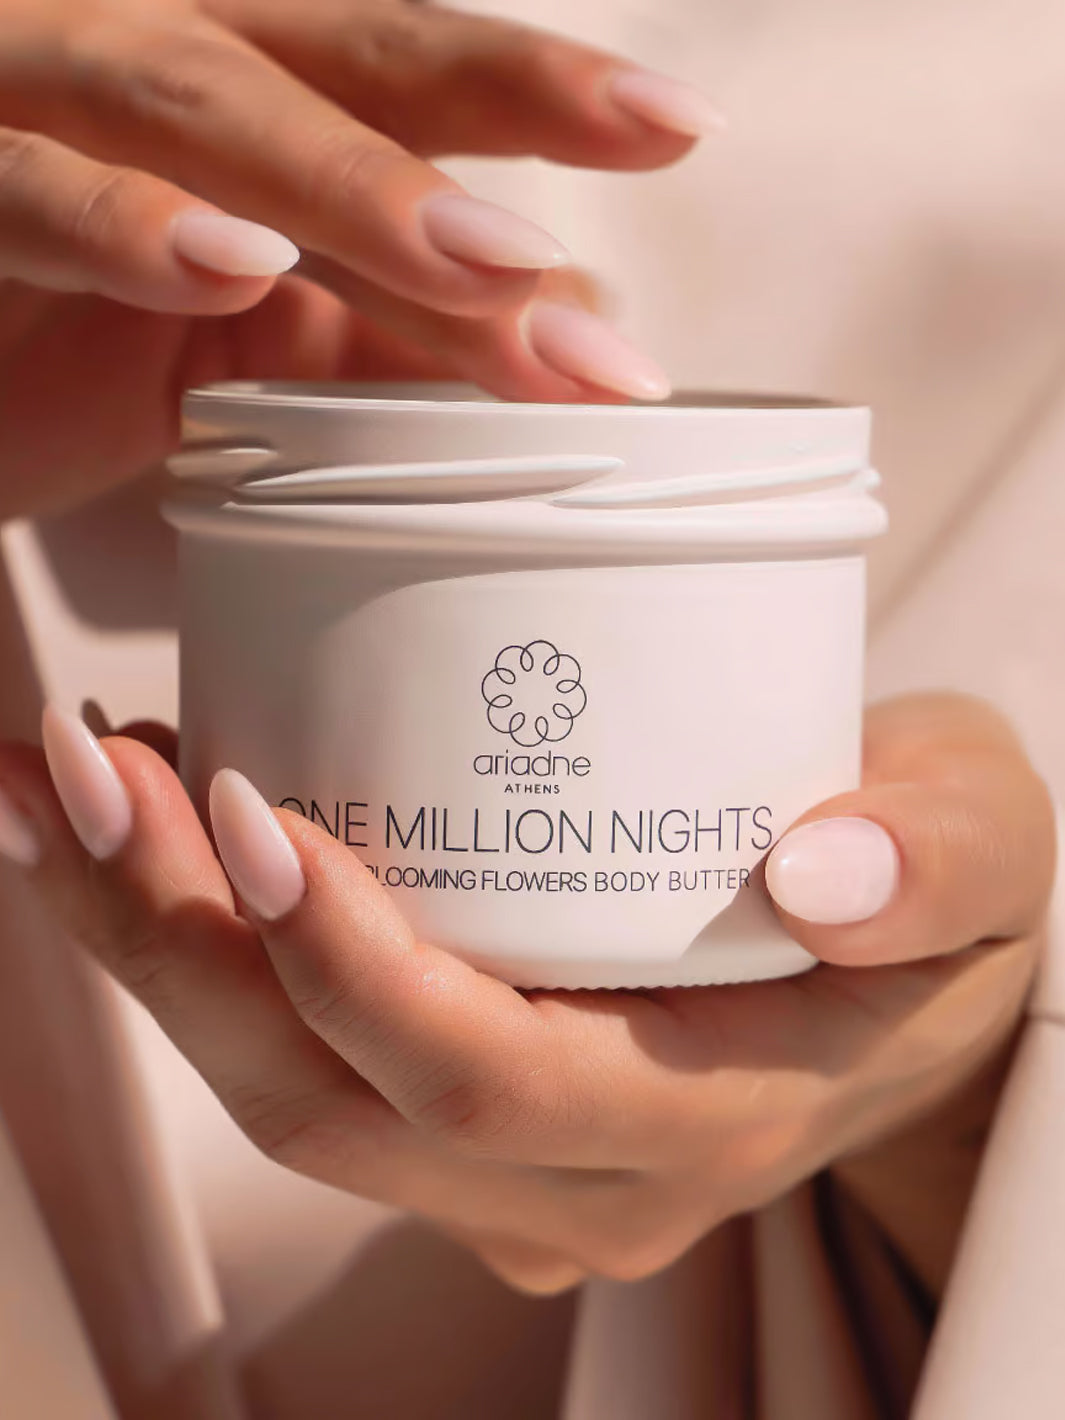 One Million Nights Floral Musk Body Butter